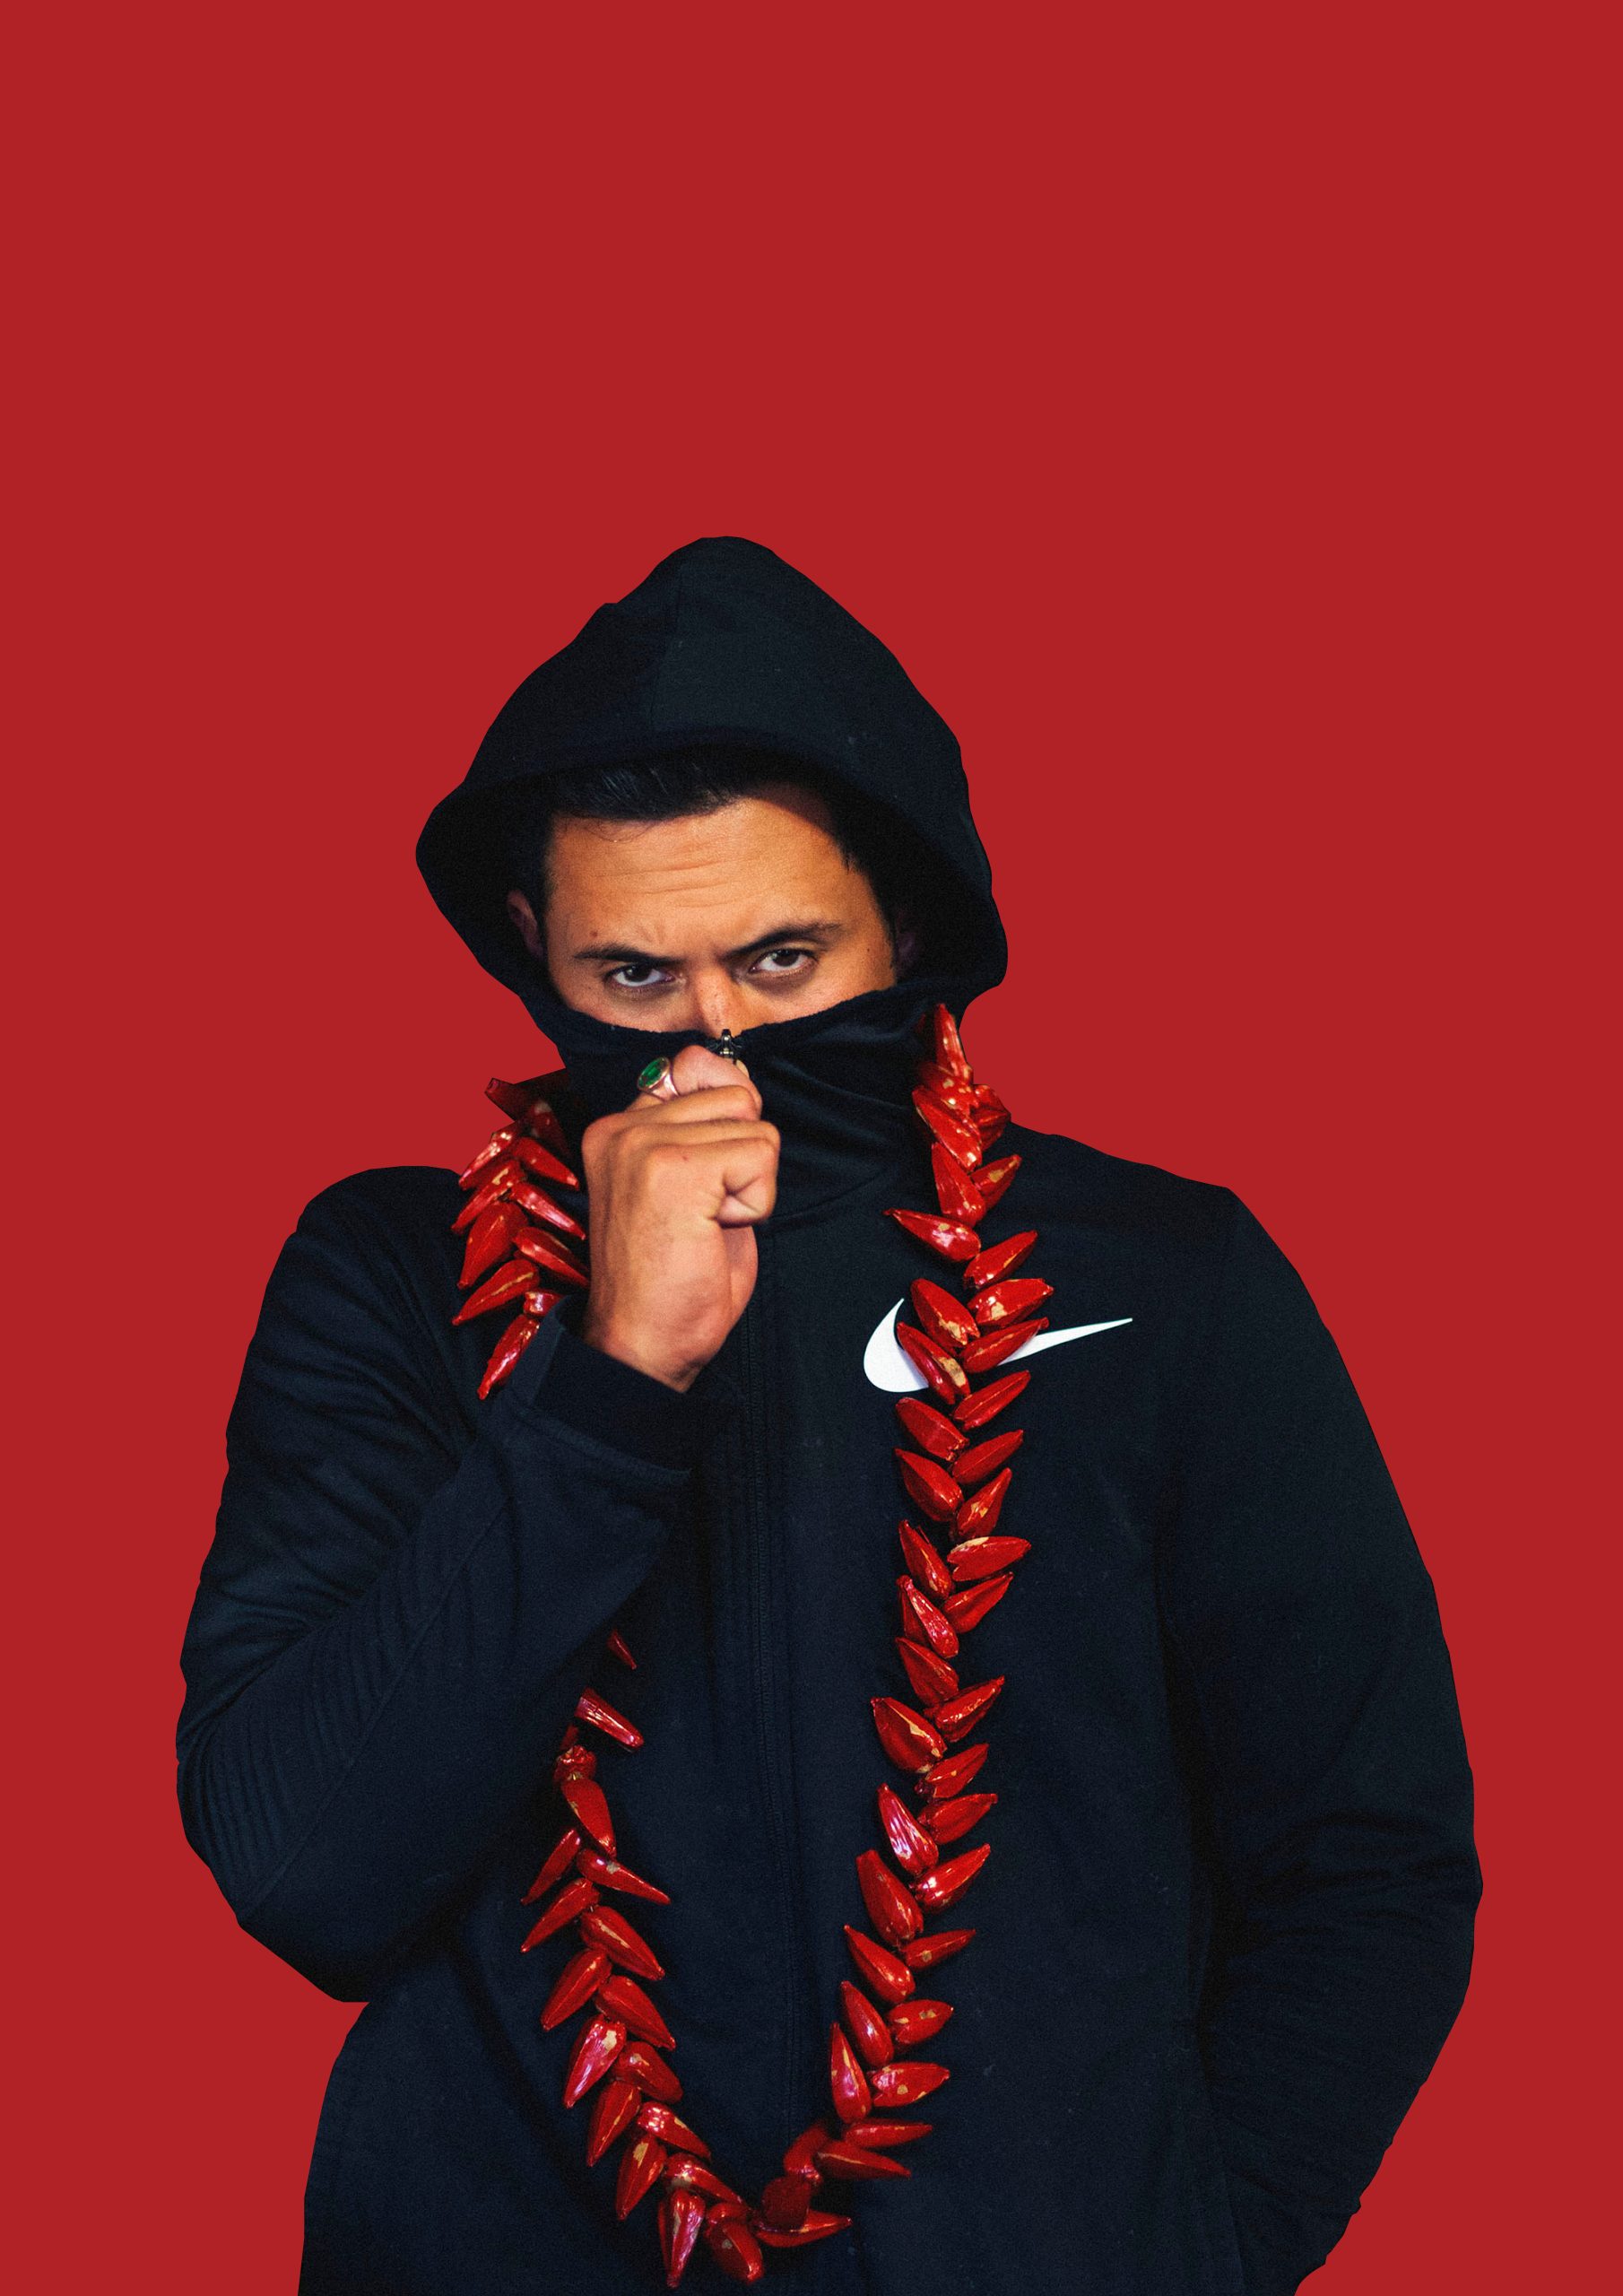 We see a man against a bright red background wearing a black Nike hoodie. He is holding the hoodie to his nose and is wearing a large necklace made out of chilles around his neck.